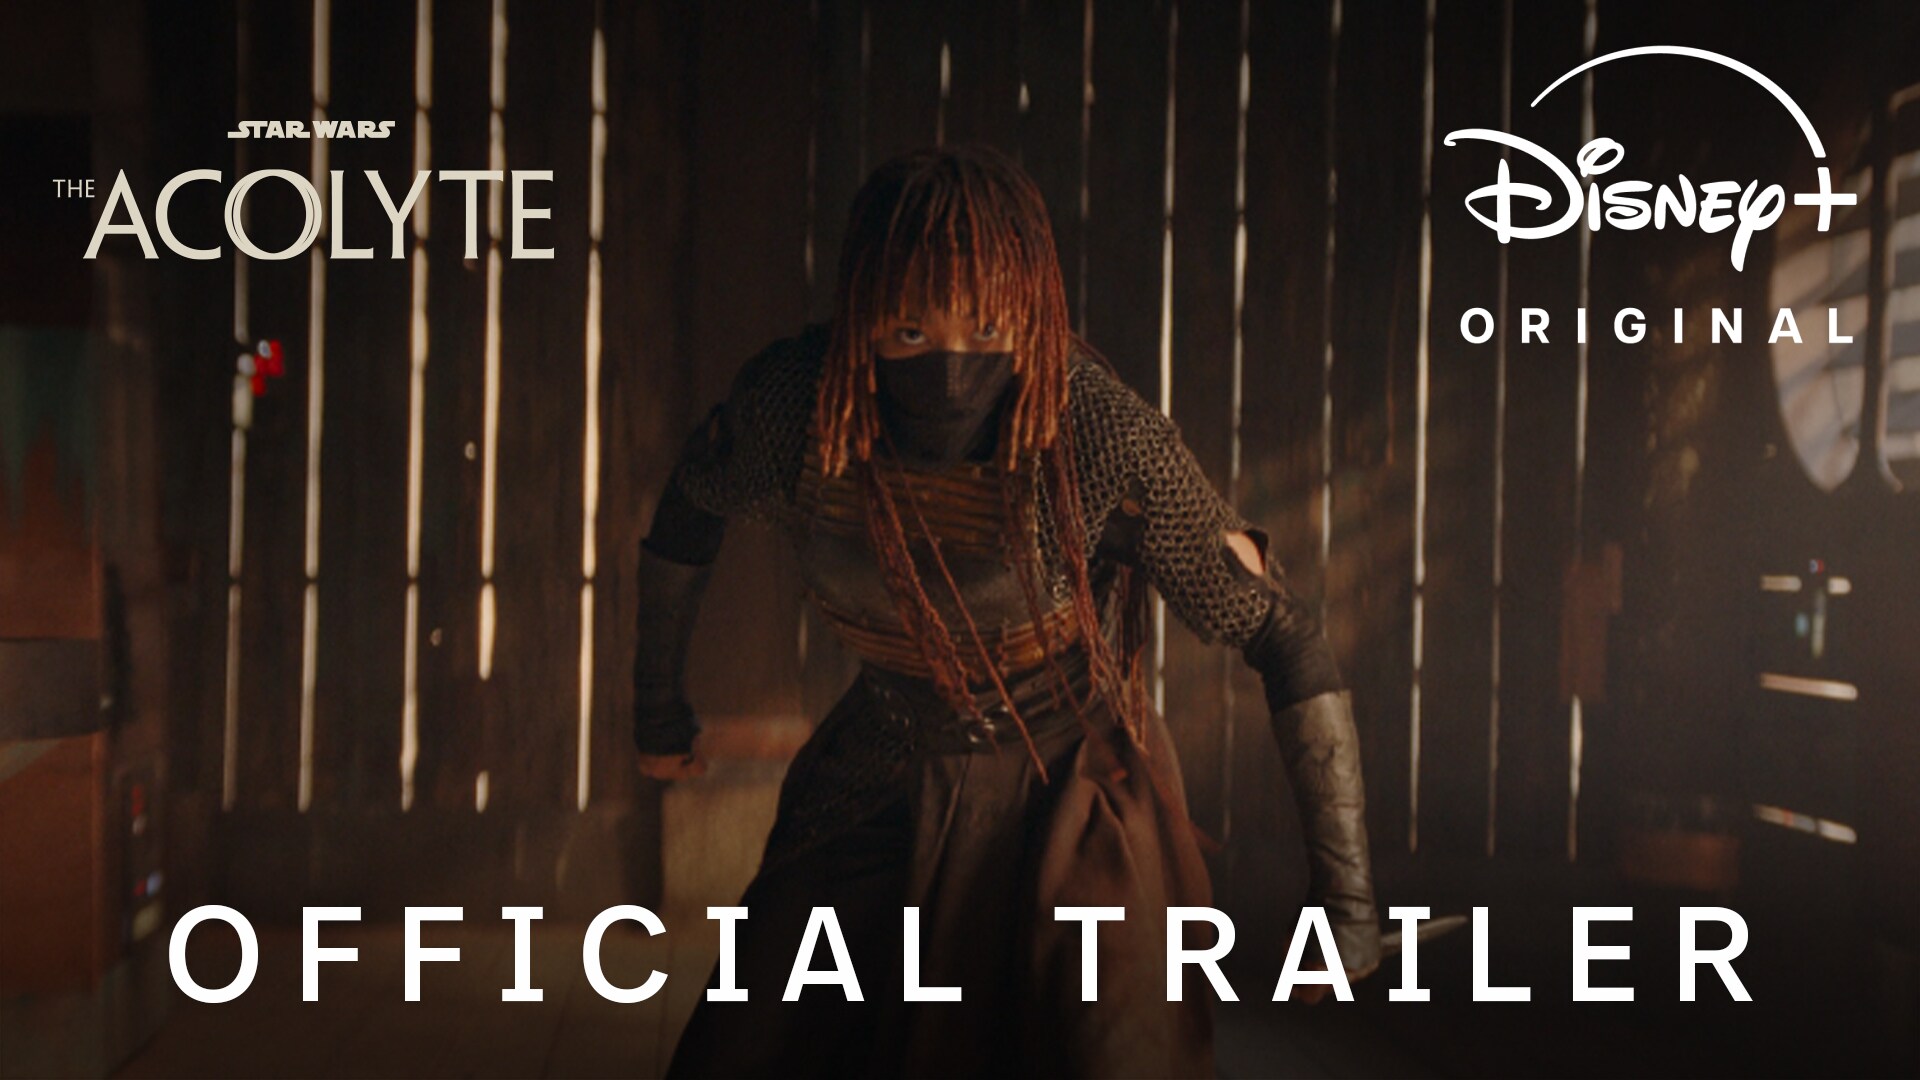 A thumbnail image for Star Wars: The Acolyte on Disney+.